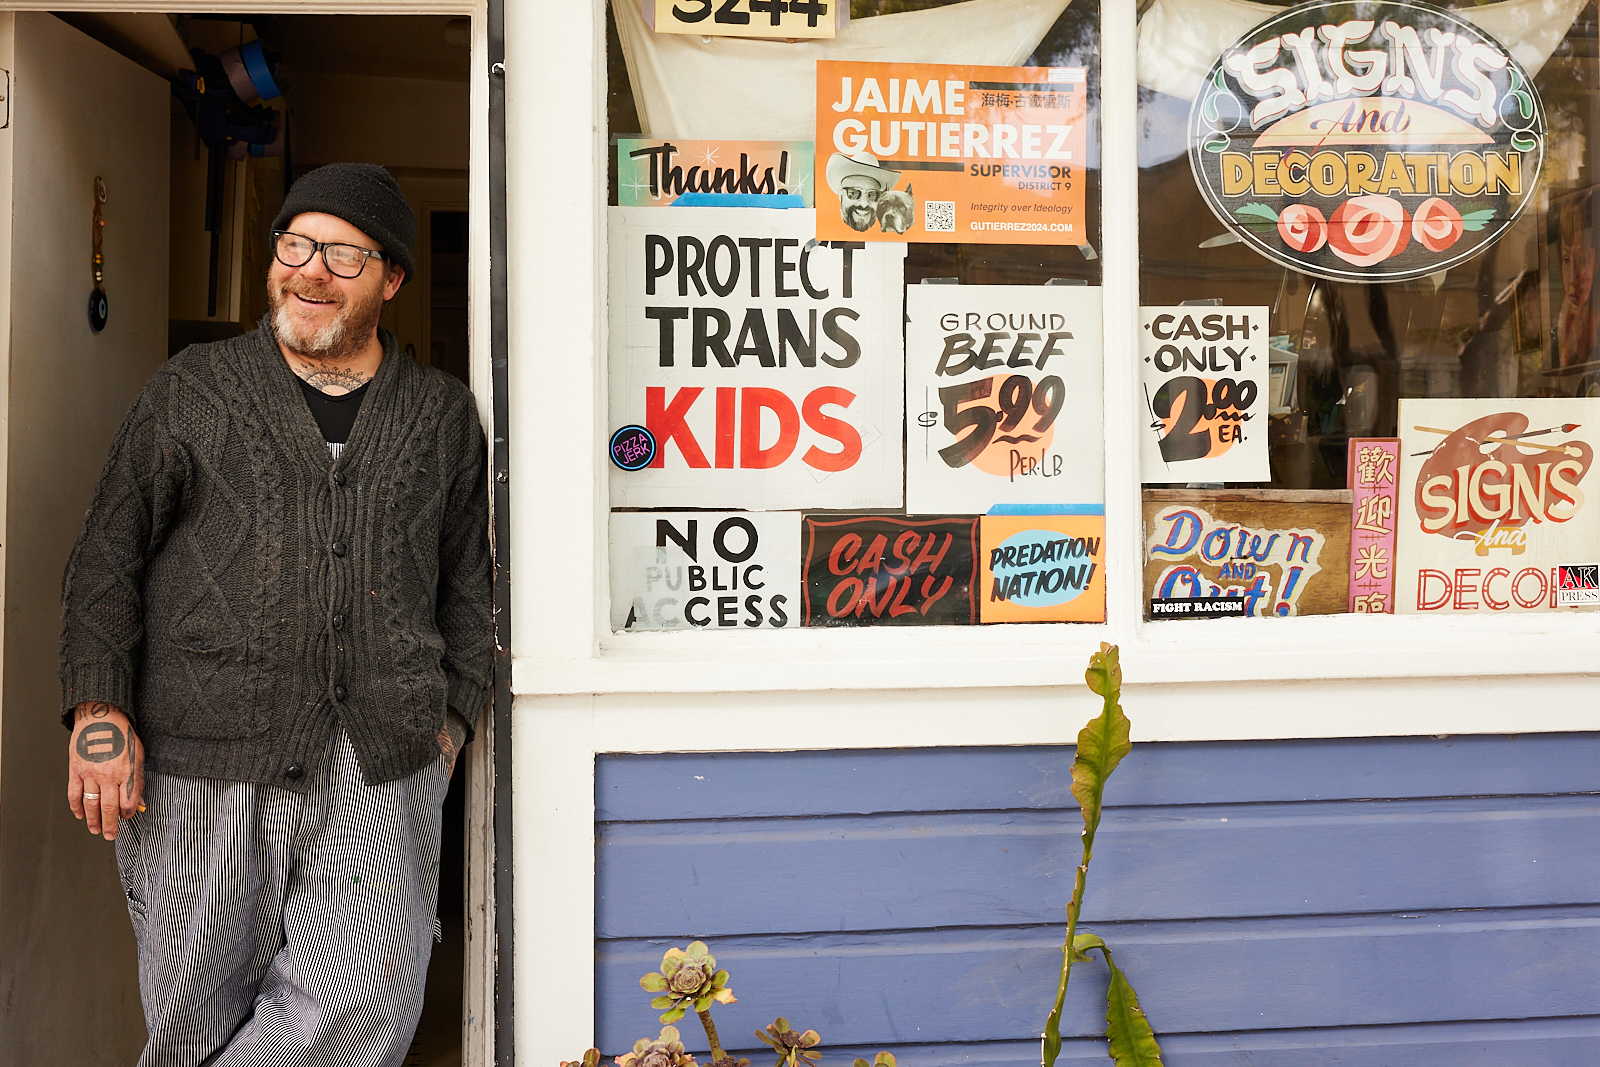 A person stands smiling at the doorway of a shop with various signs in the window, including "Protect Trans Kids," "Ground Beef $5.99 per lb," and "Cash Only $2.00 ea."